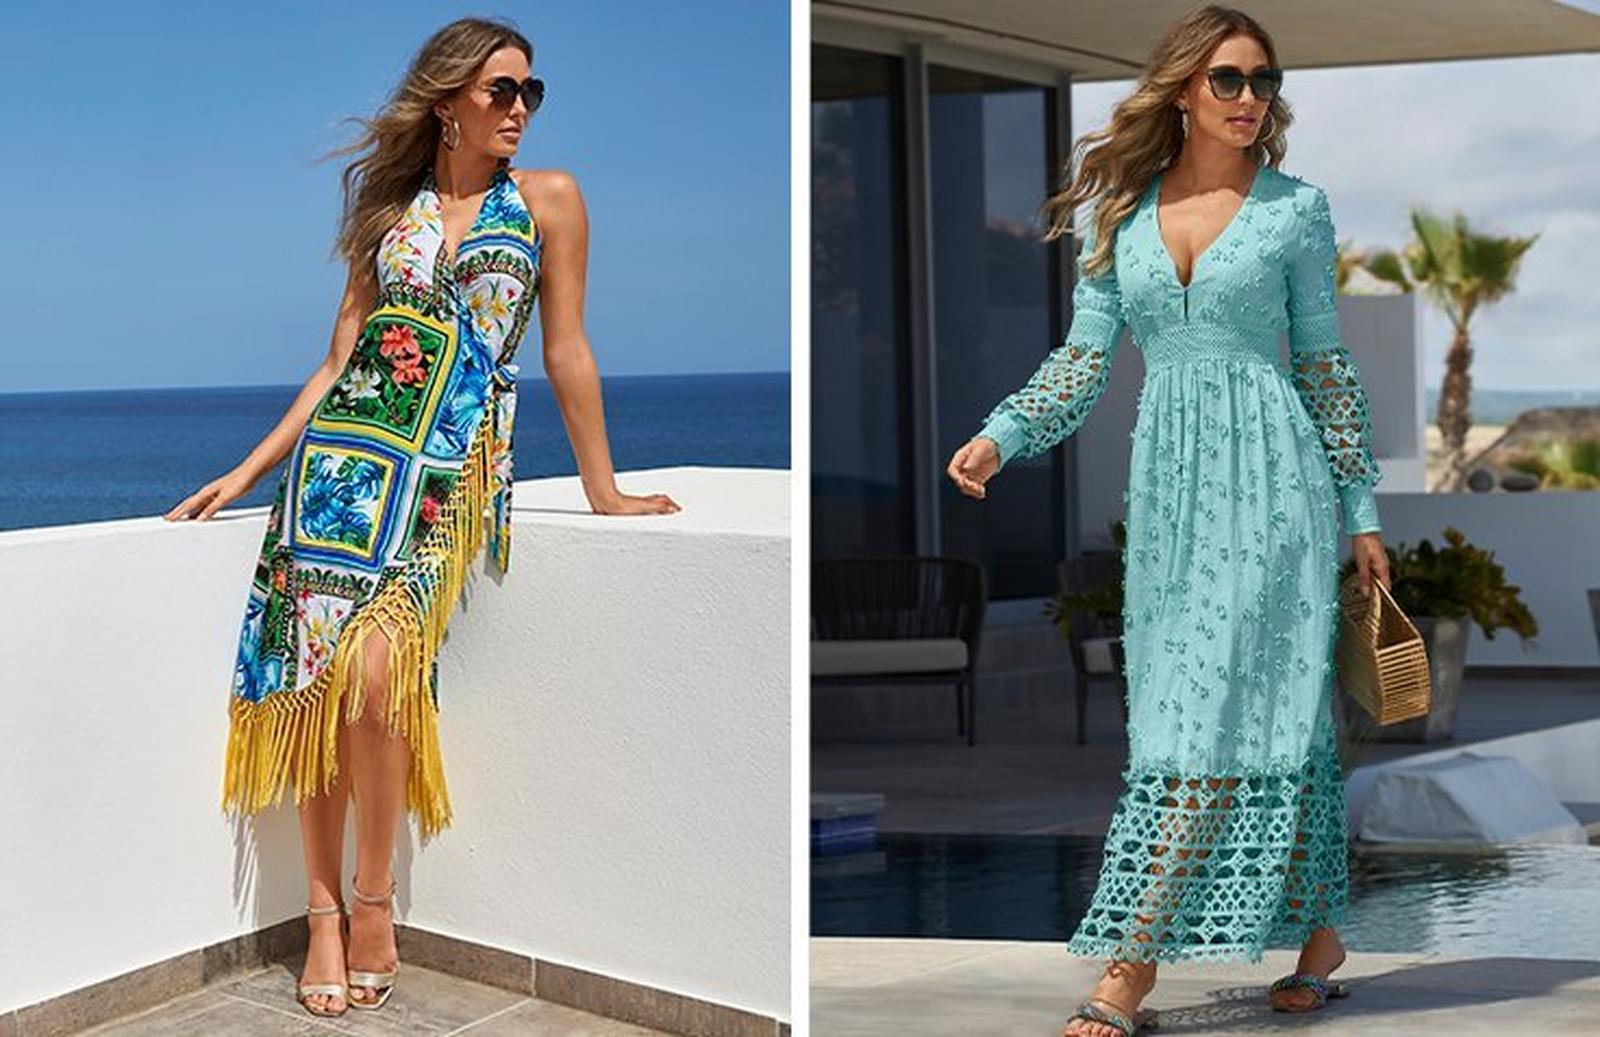 left model wearing a patchwork halter wrap dress with yellow fringe, sunglasses, and gold heels. right model wearing a light blue mixed media long-sleeve v-neck maxi dress, sunglasses, and crystal sandals.